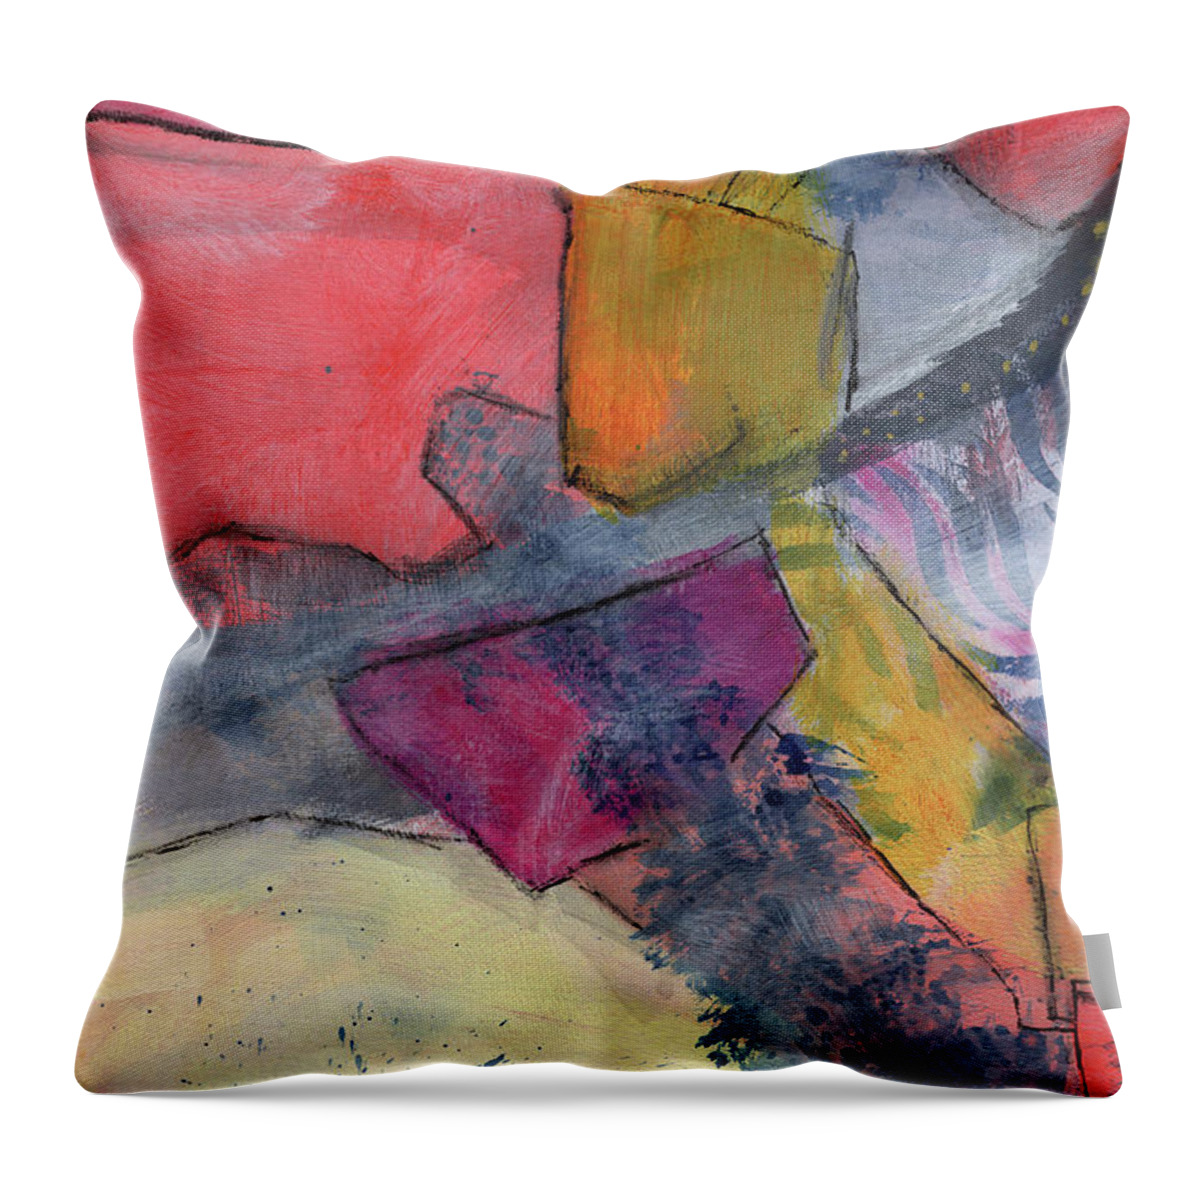 Orange Throw Pillow featuring the painting The Garden Quilt I by Diane Maley